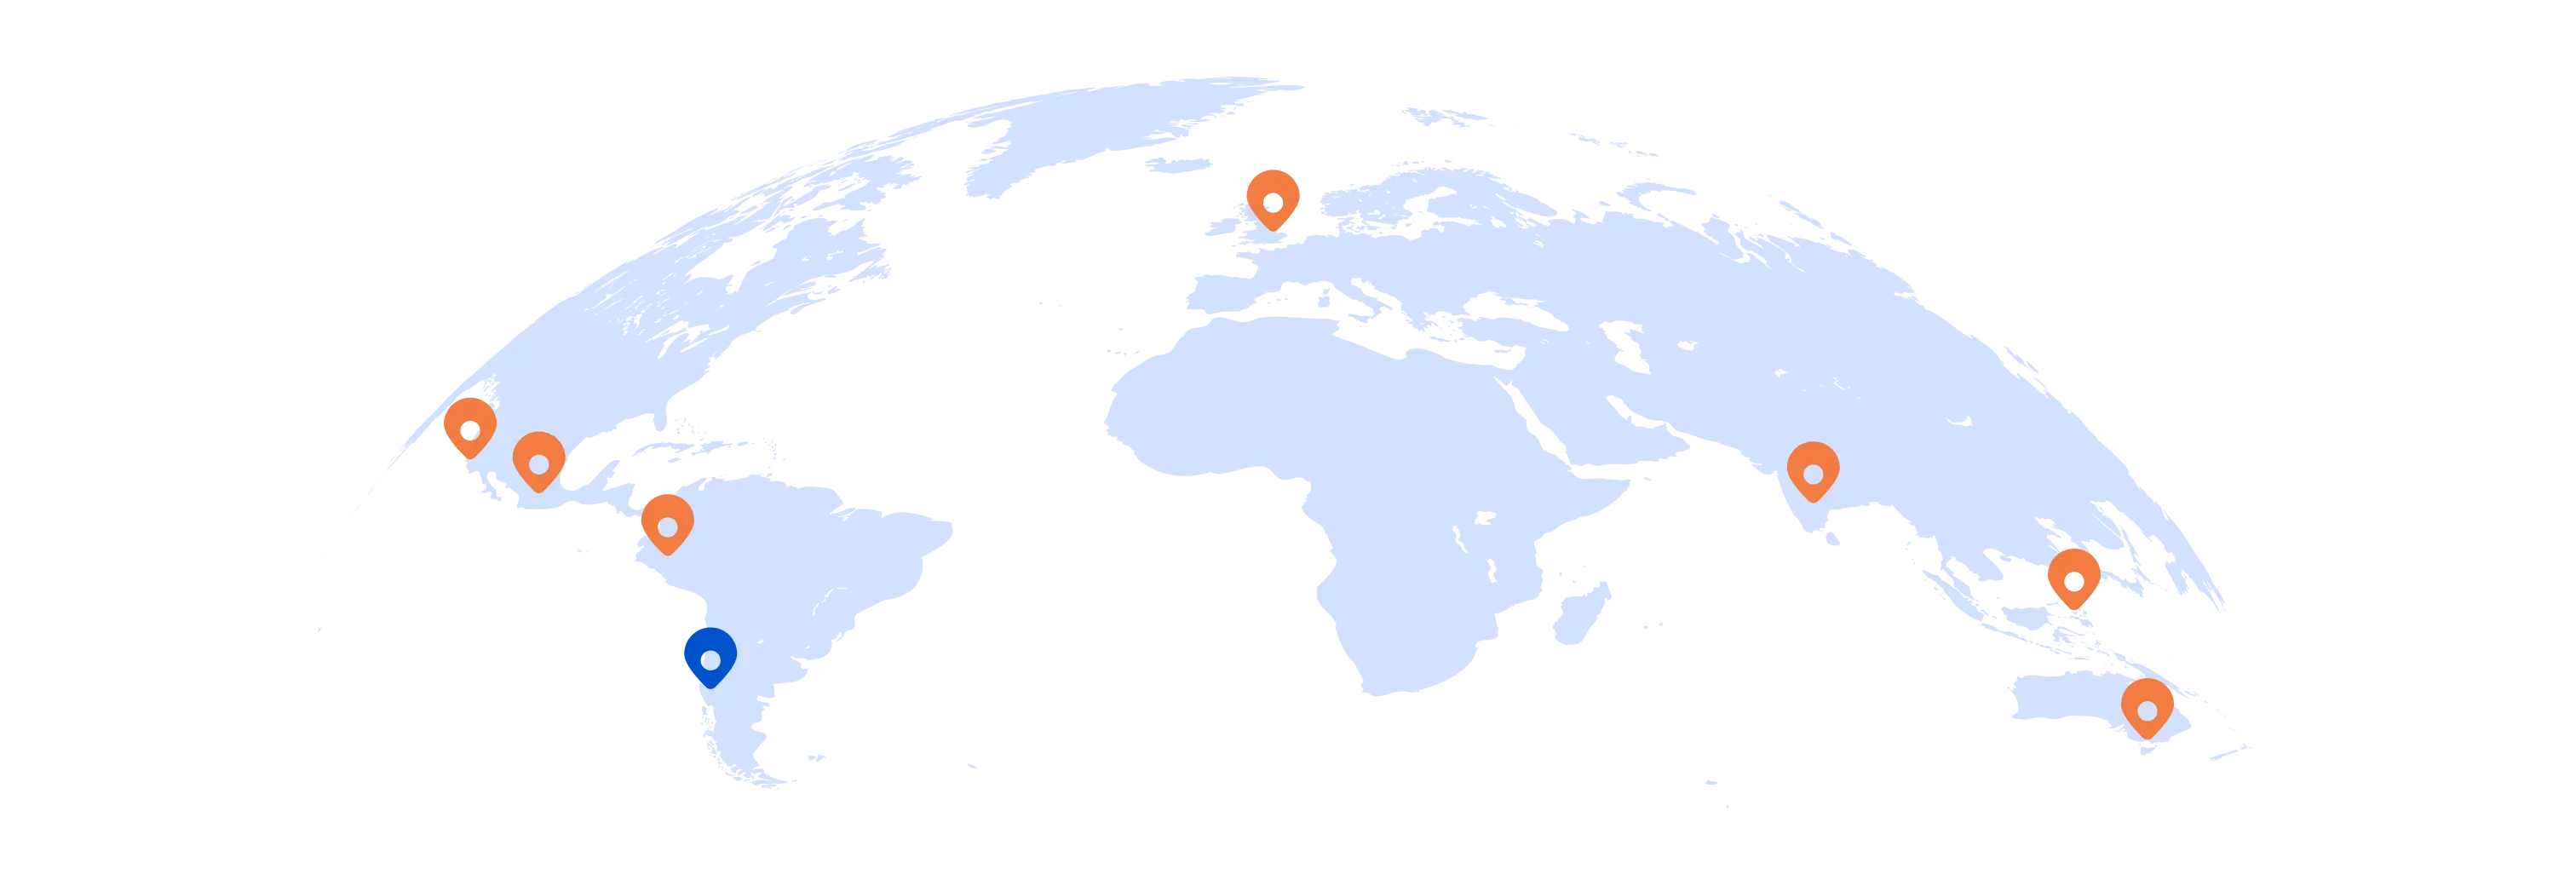 Map of DispatchTrack's offices around the world